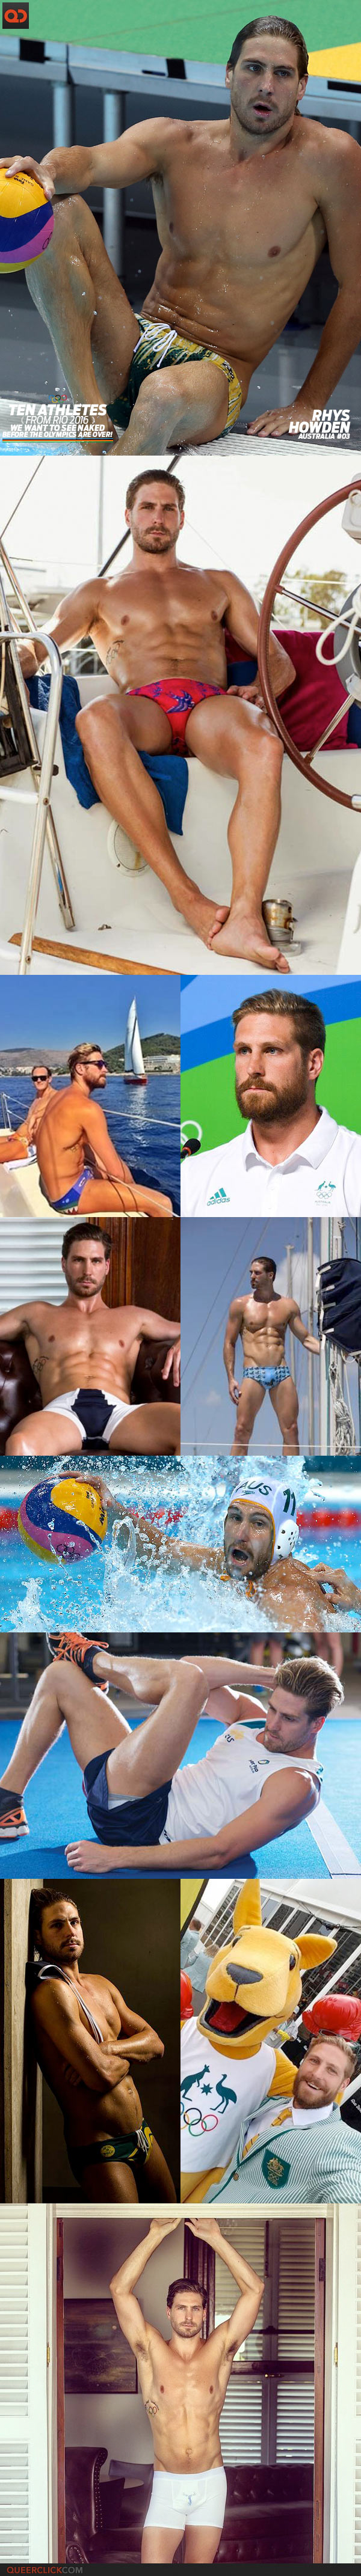 Ten Athletes From Rio 2016 That We Want To See Naked Before The Olympics Are Over! - Rhys Howden